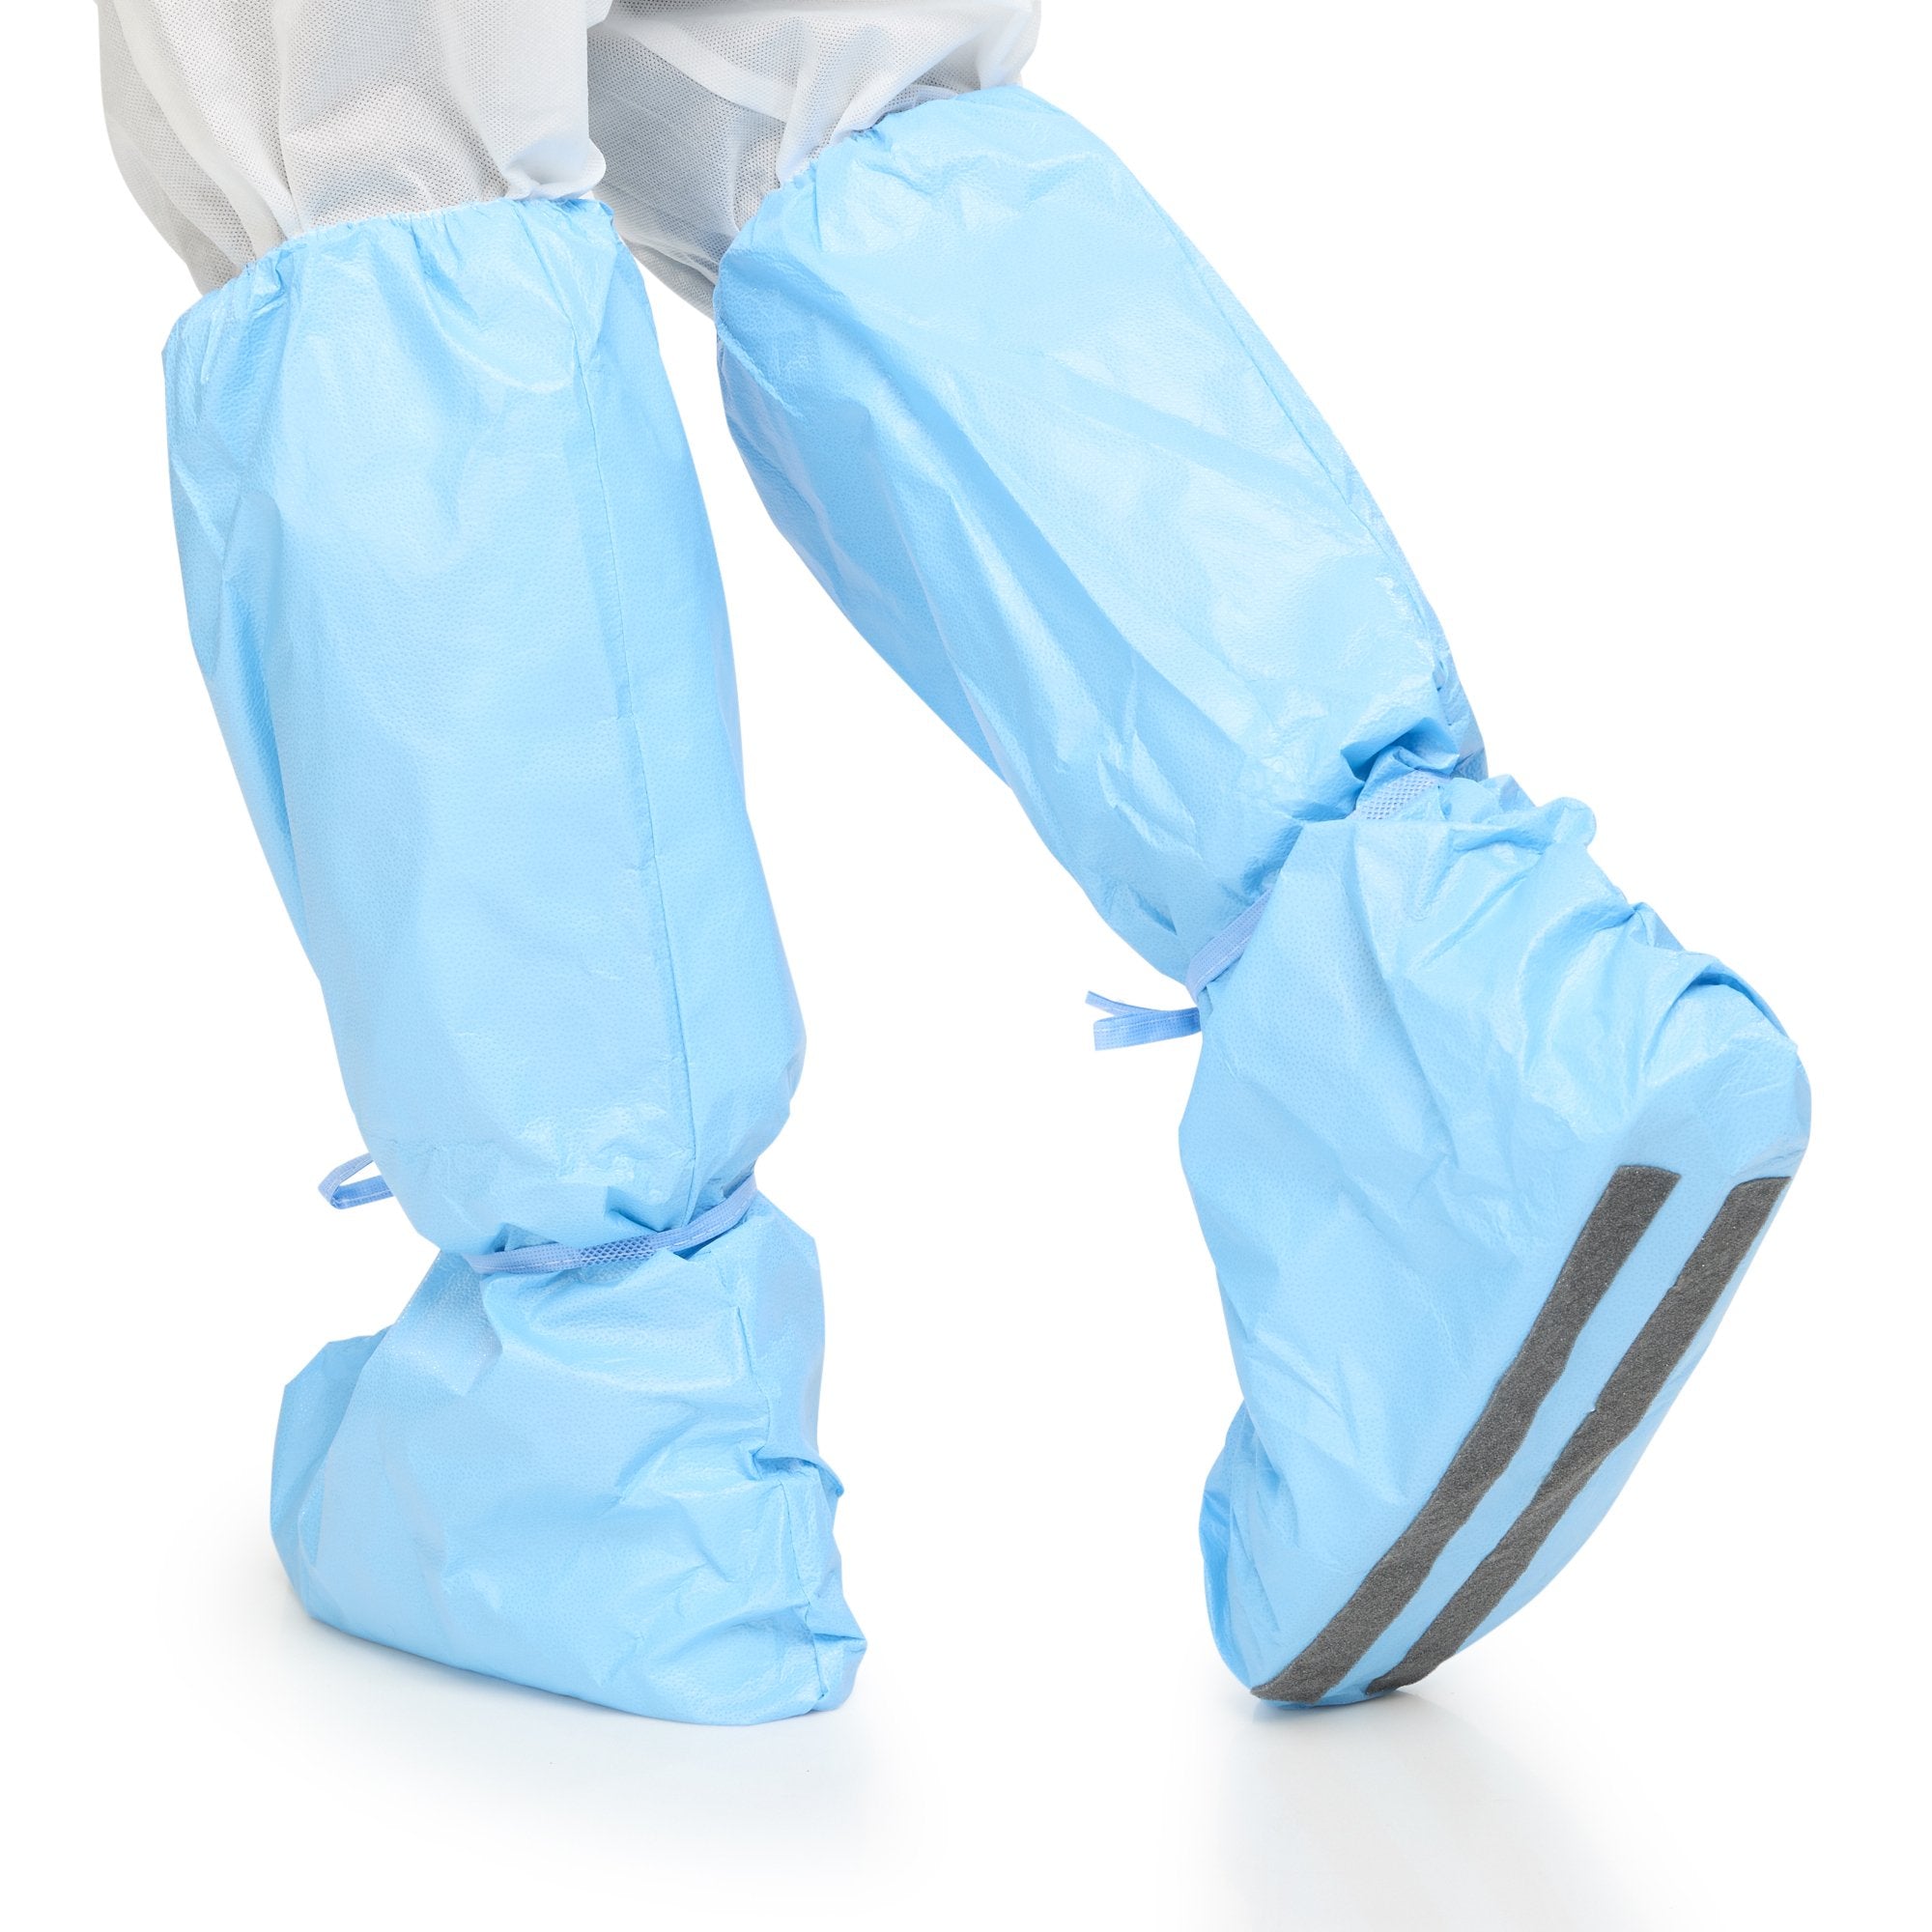 Boot Cover Hi Guard X-Large Knee High Nonskid Sole Blue NonSterile